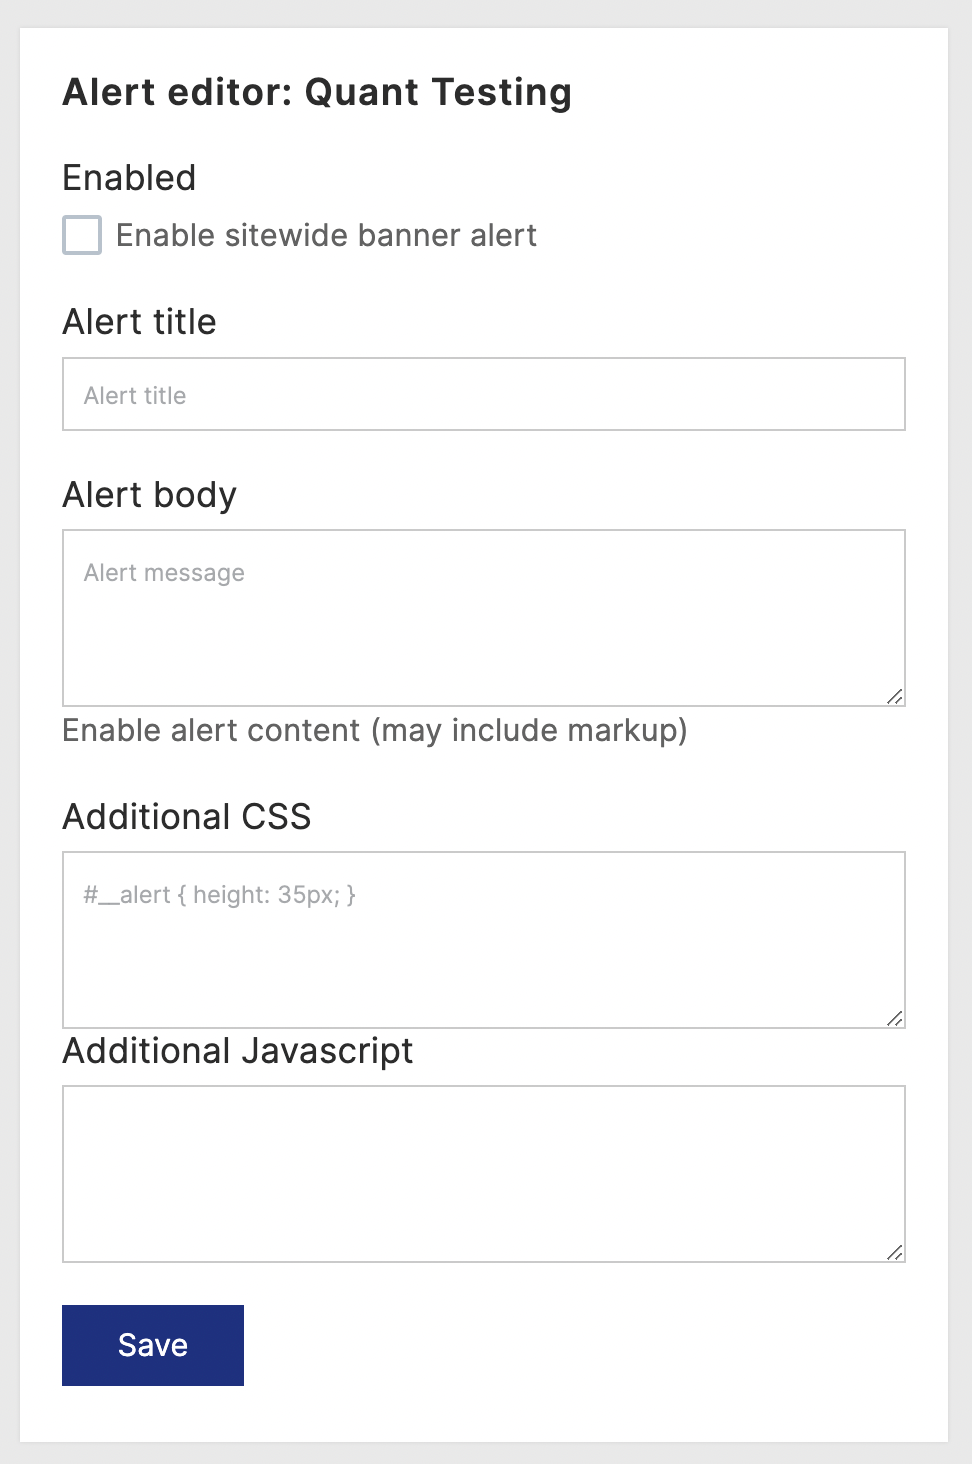 Quant Alert editor form with empty fields